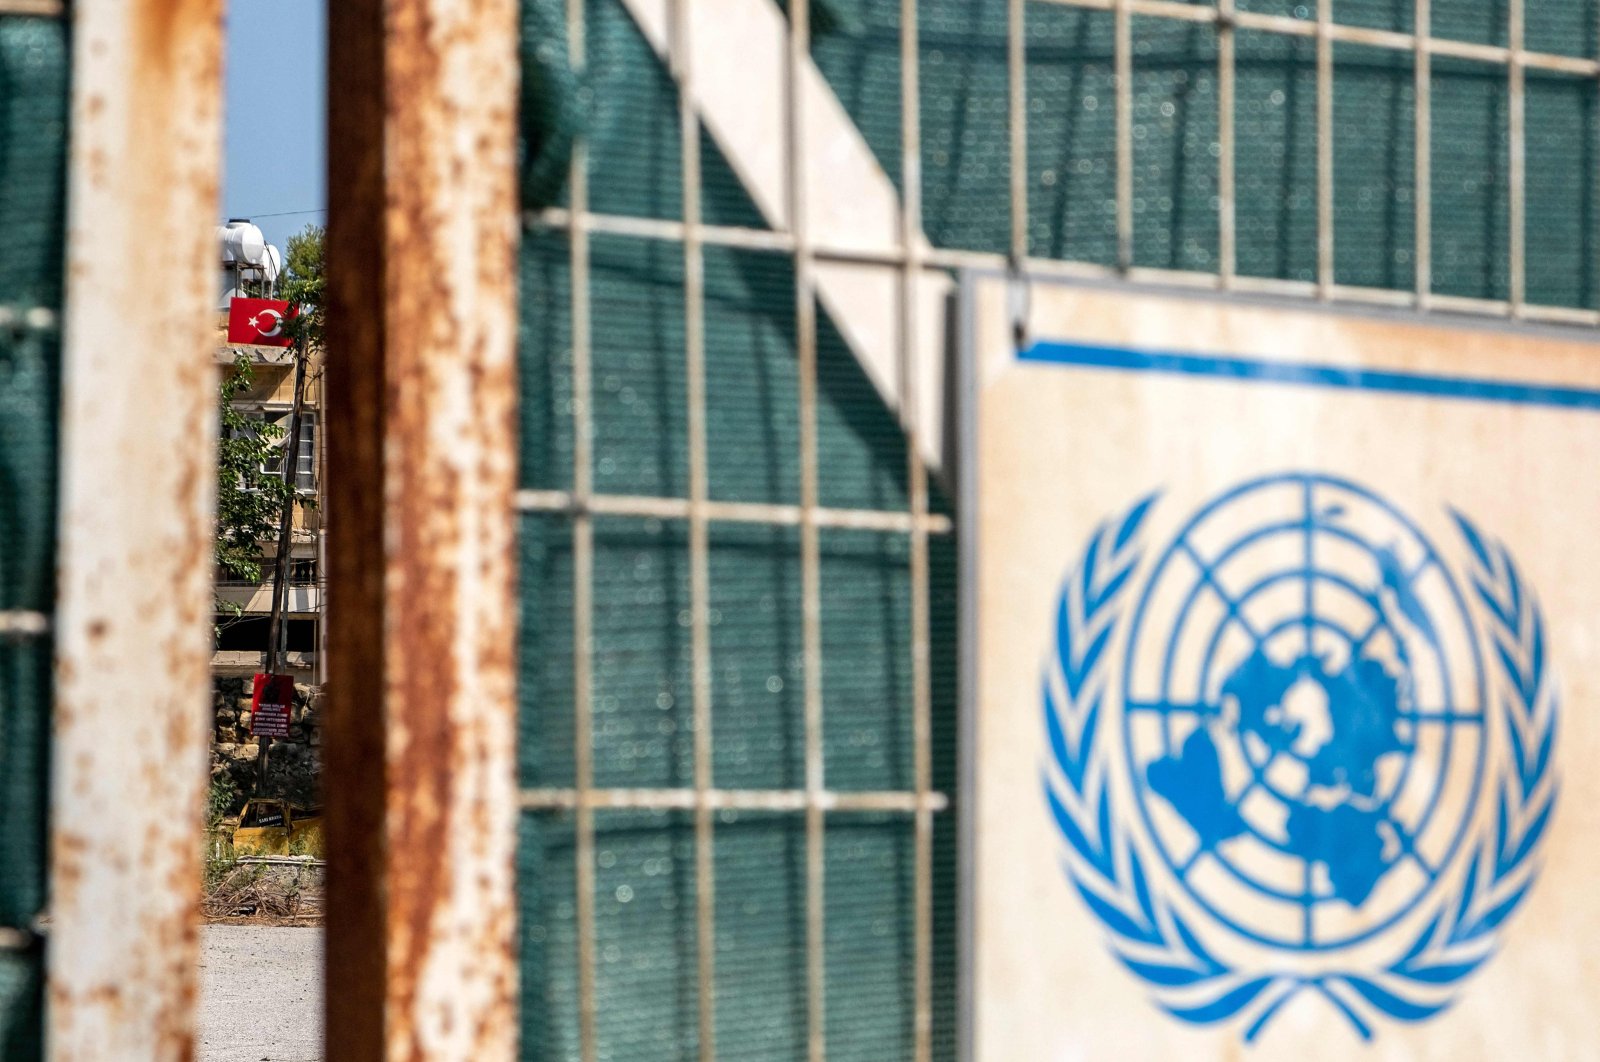 The seal of the United Nations is pictured on a gate leading to the U.N. buffer zone splitting the Cypriot capital Lefkoşa (Nicosia), with a Turkish flag visible in the background in the Turkish Republic of North Cyprus (TRNC), July 11, 2023. (AFP Photo)